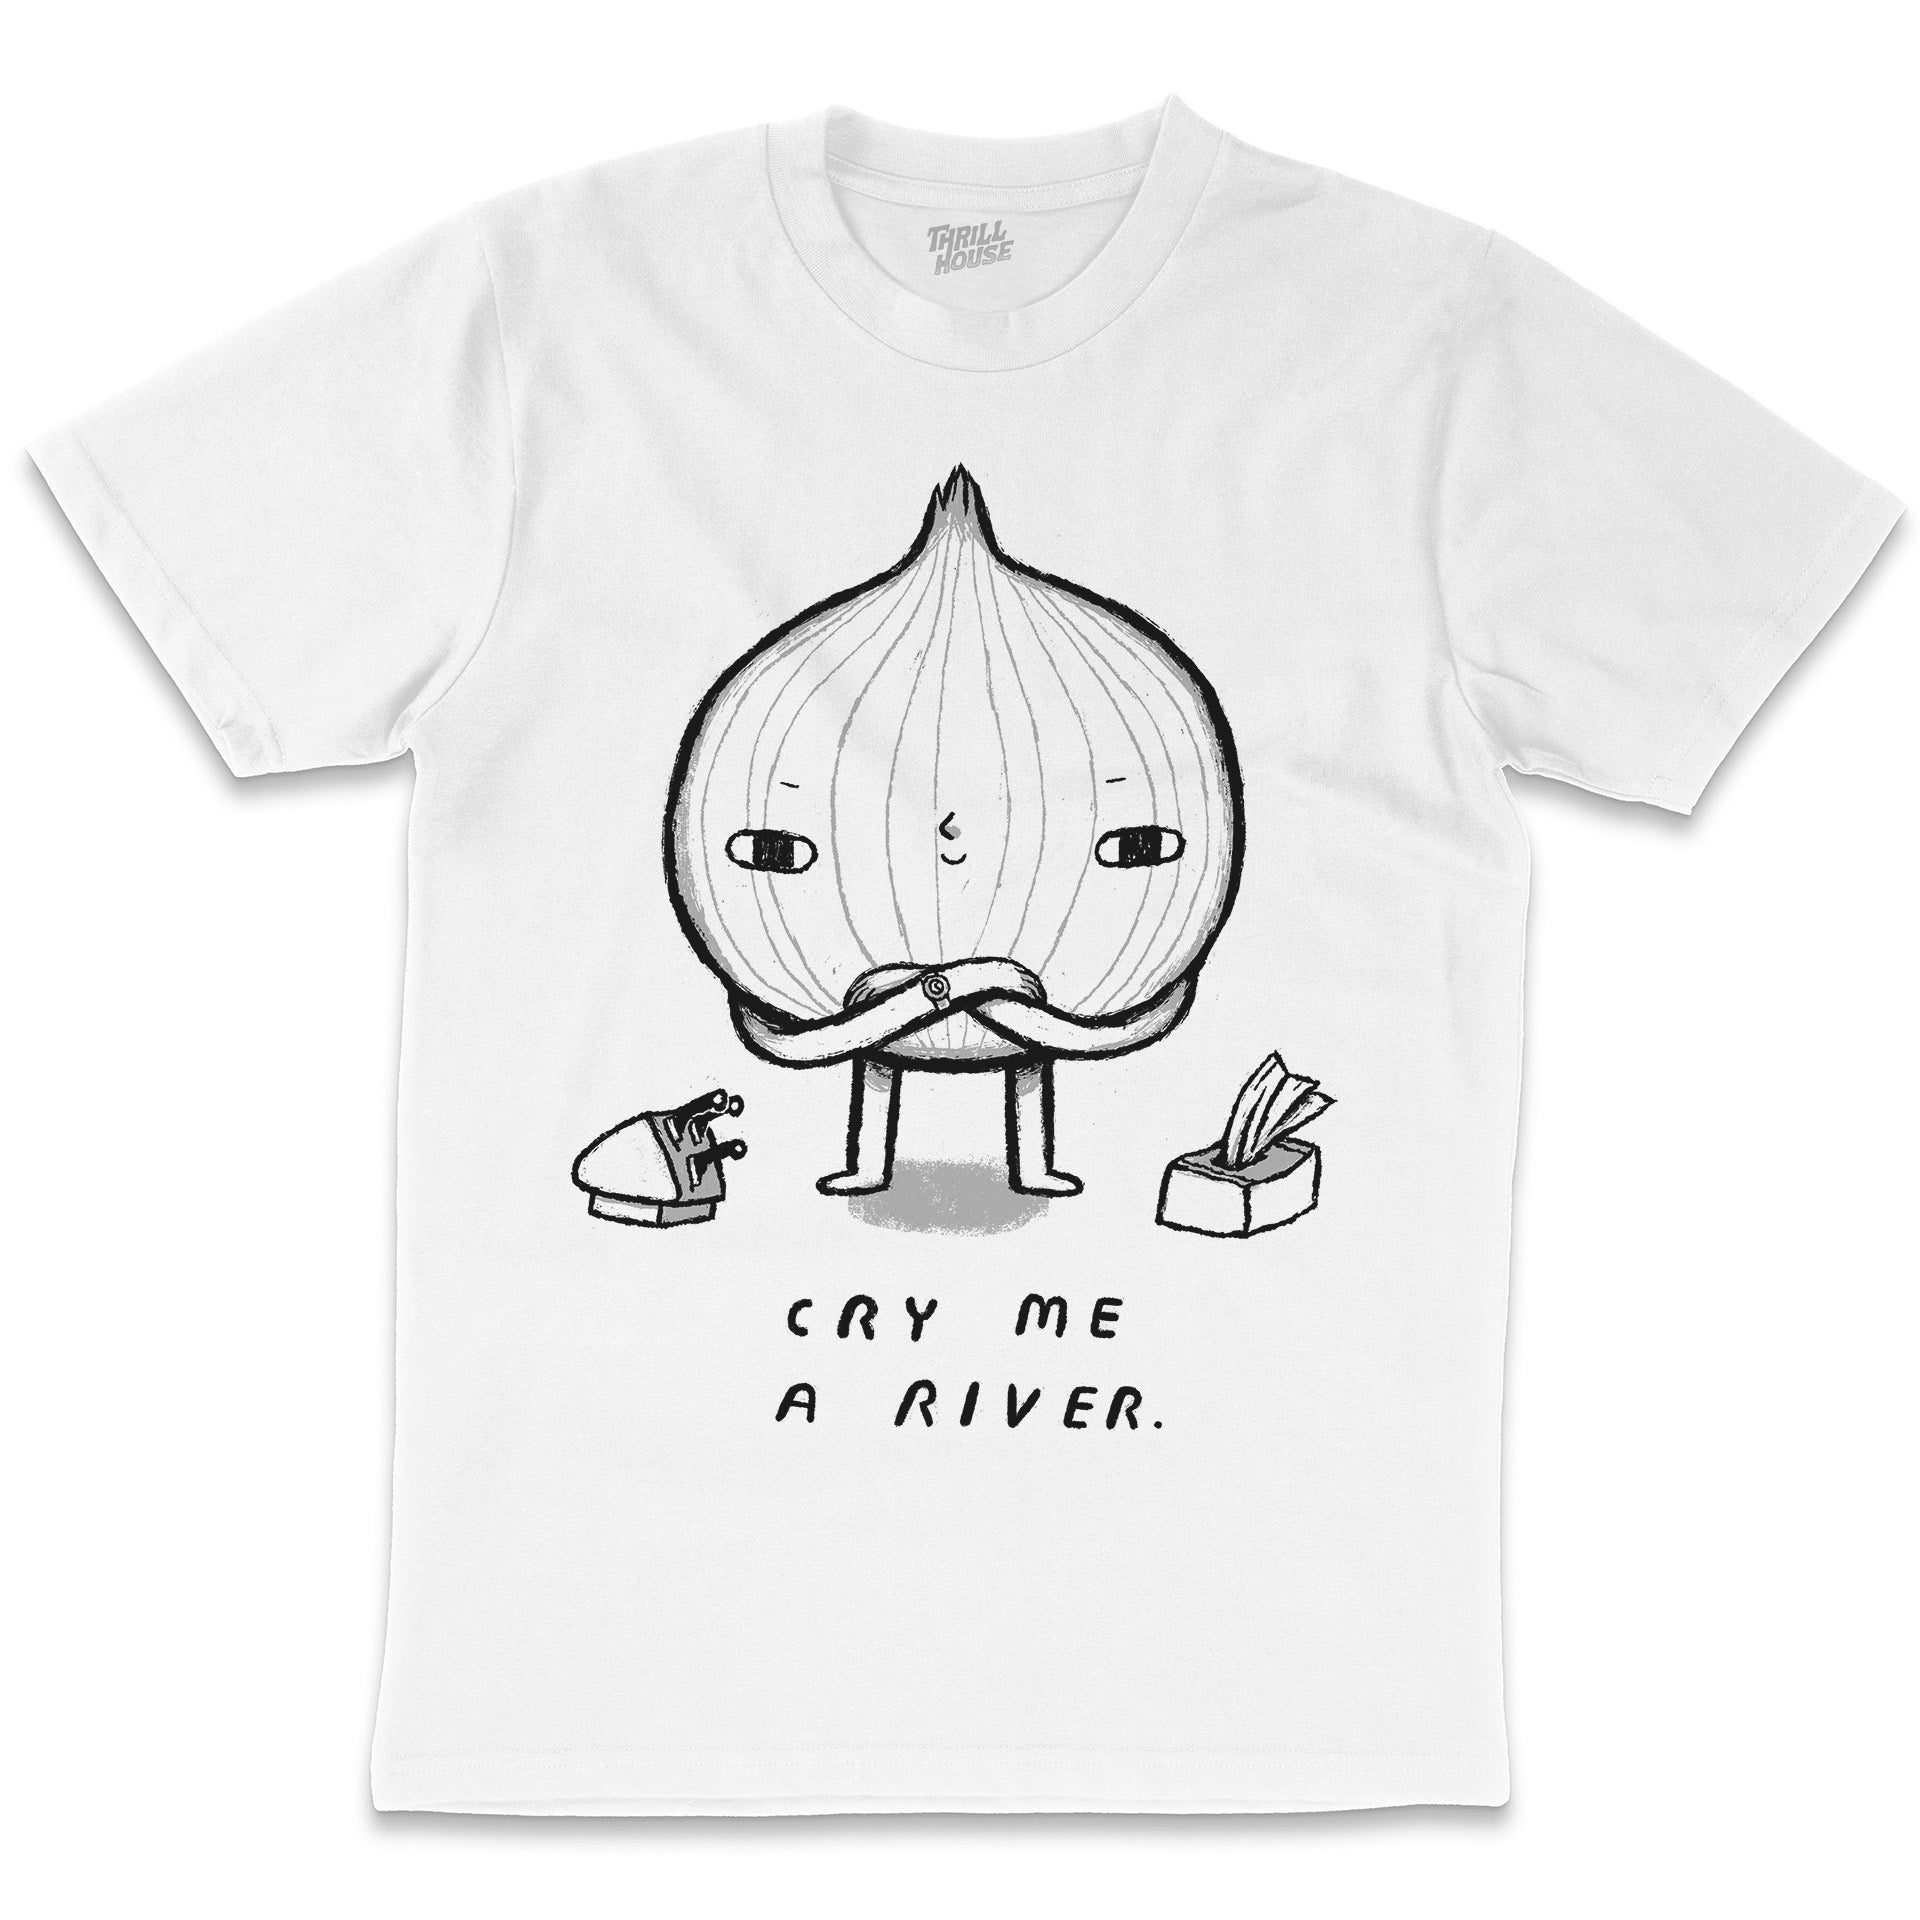 Cry Me a River Funny Foodie Onion Slogan Saying Cotton T-Shirt